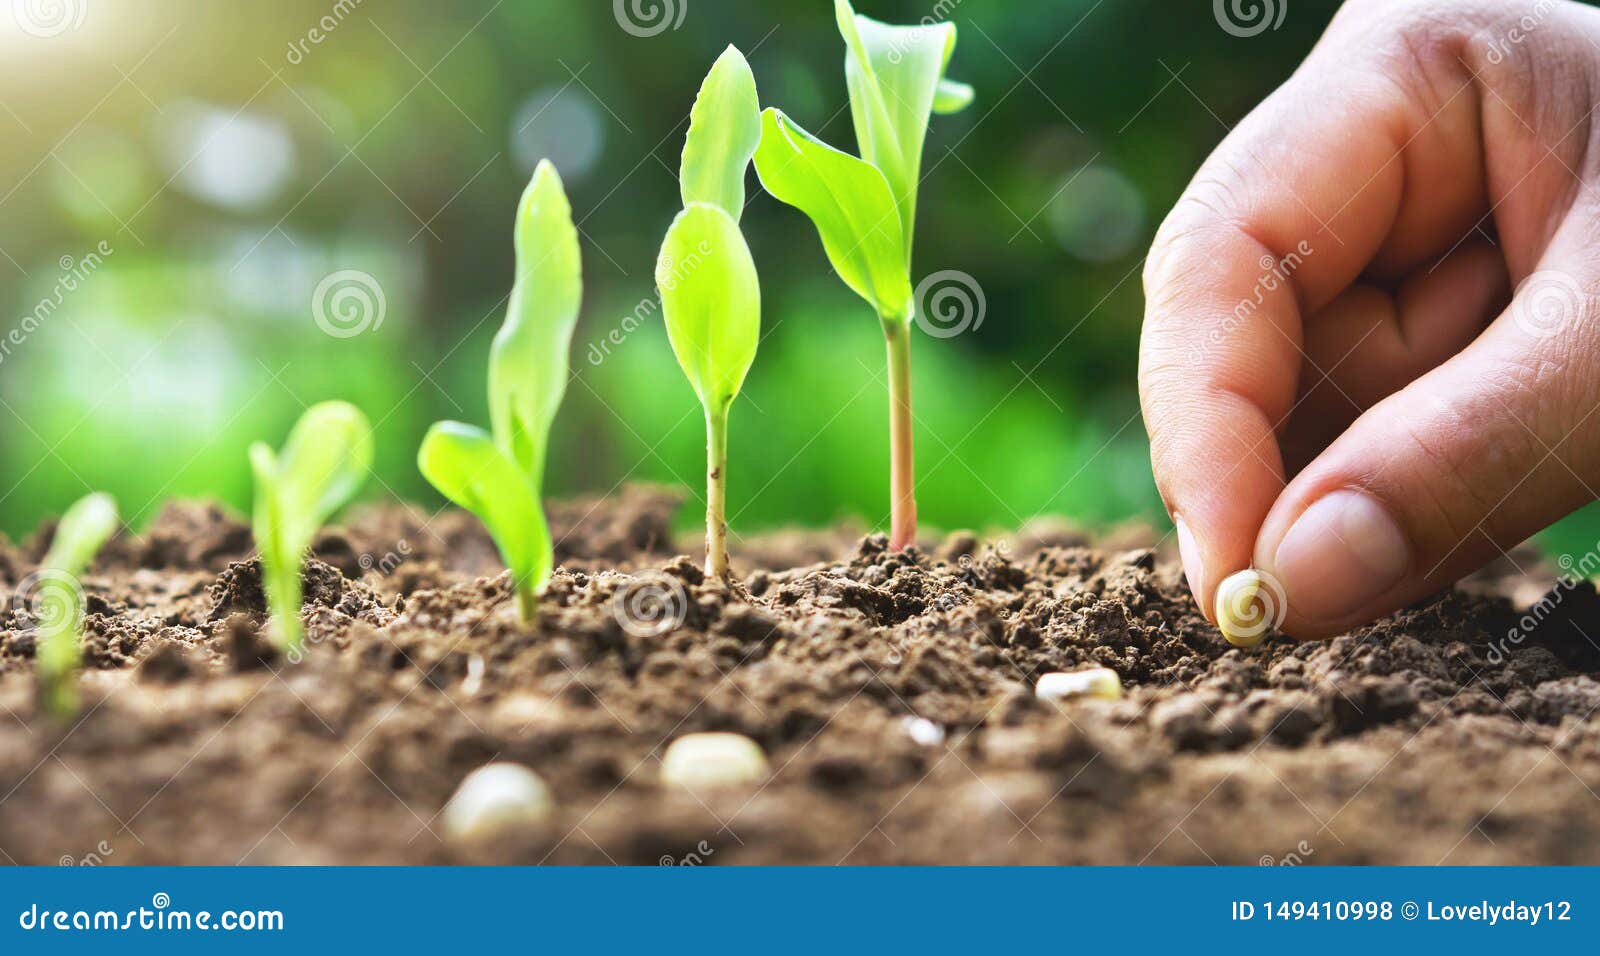 Hand Planting Corn Seed Of Marrow In The Vegetable Garden With